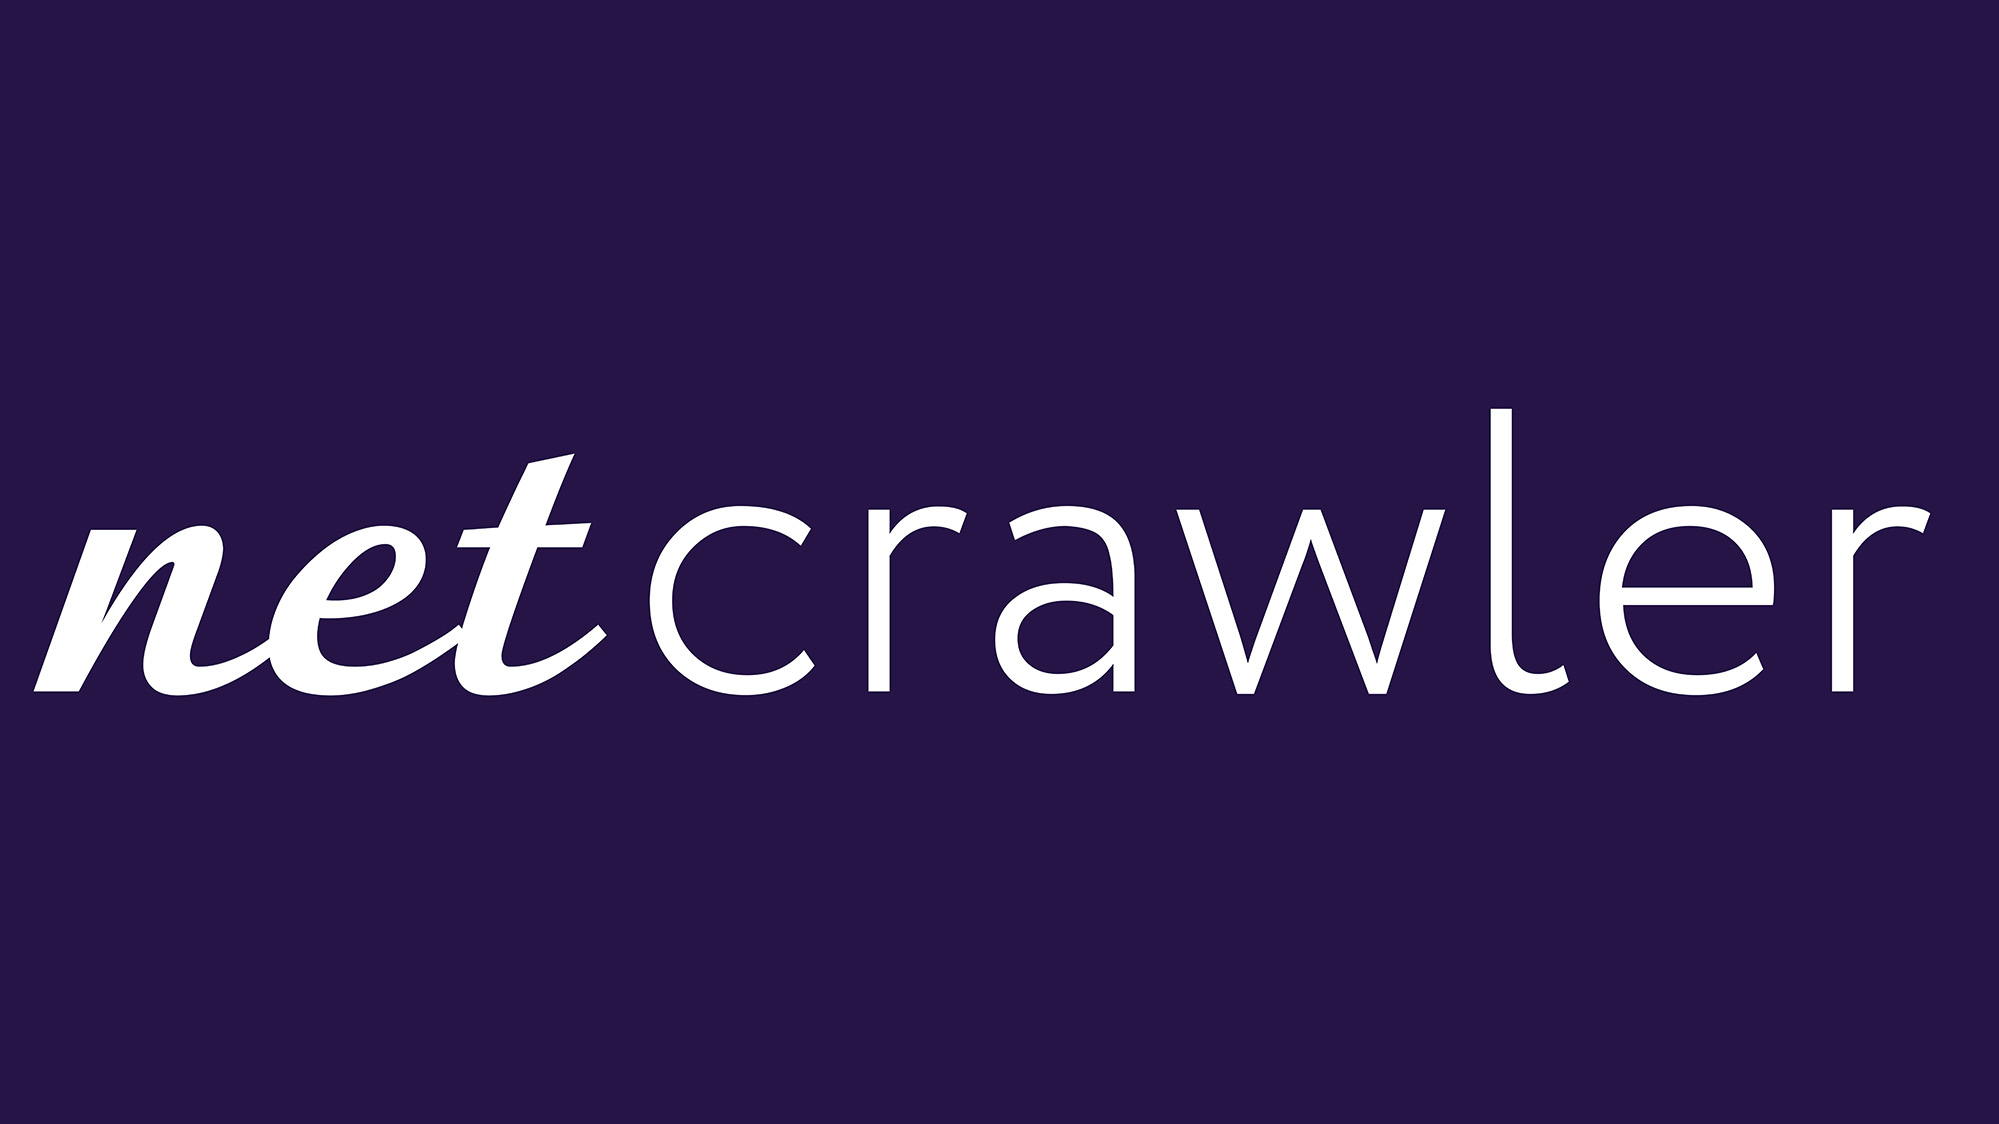 Netcrawler offers affordable and reliable internet for customers in Ontario